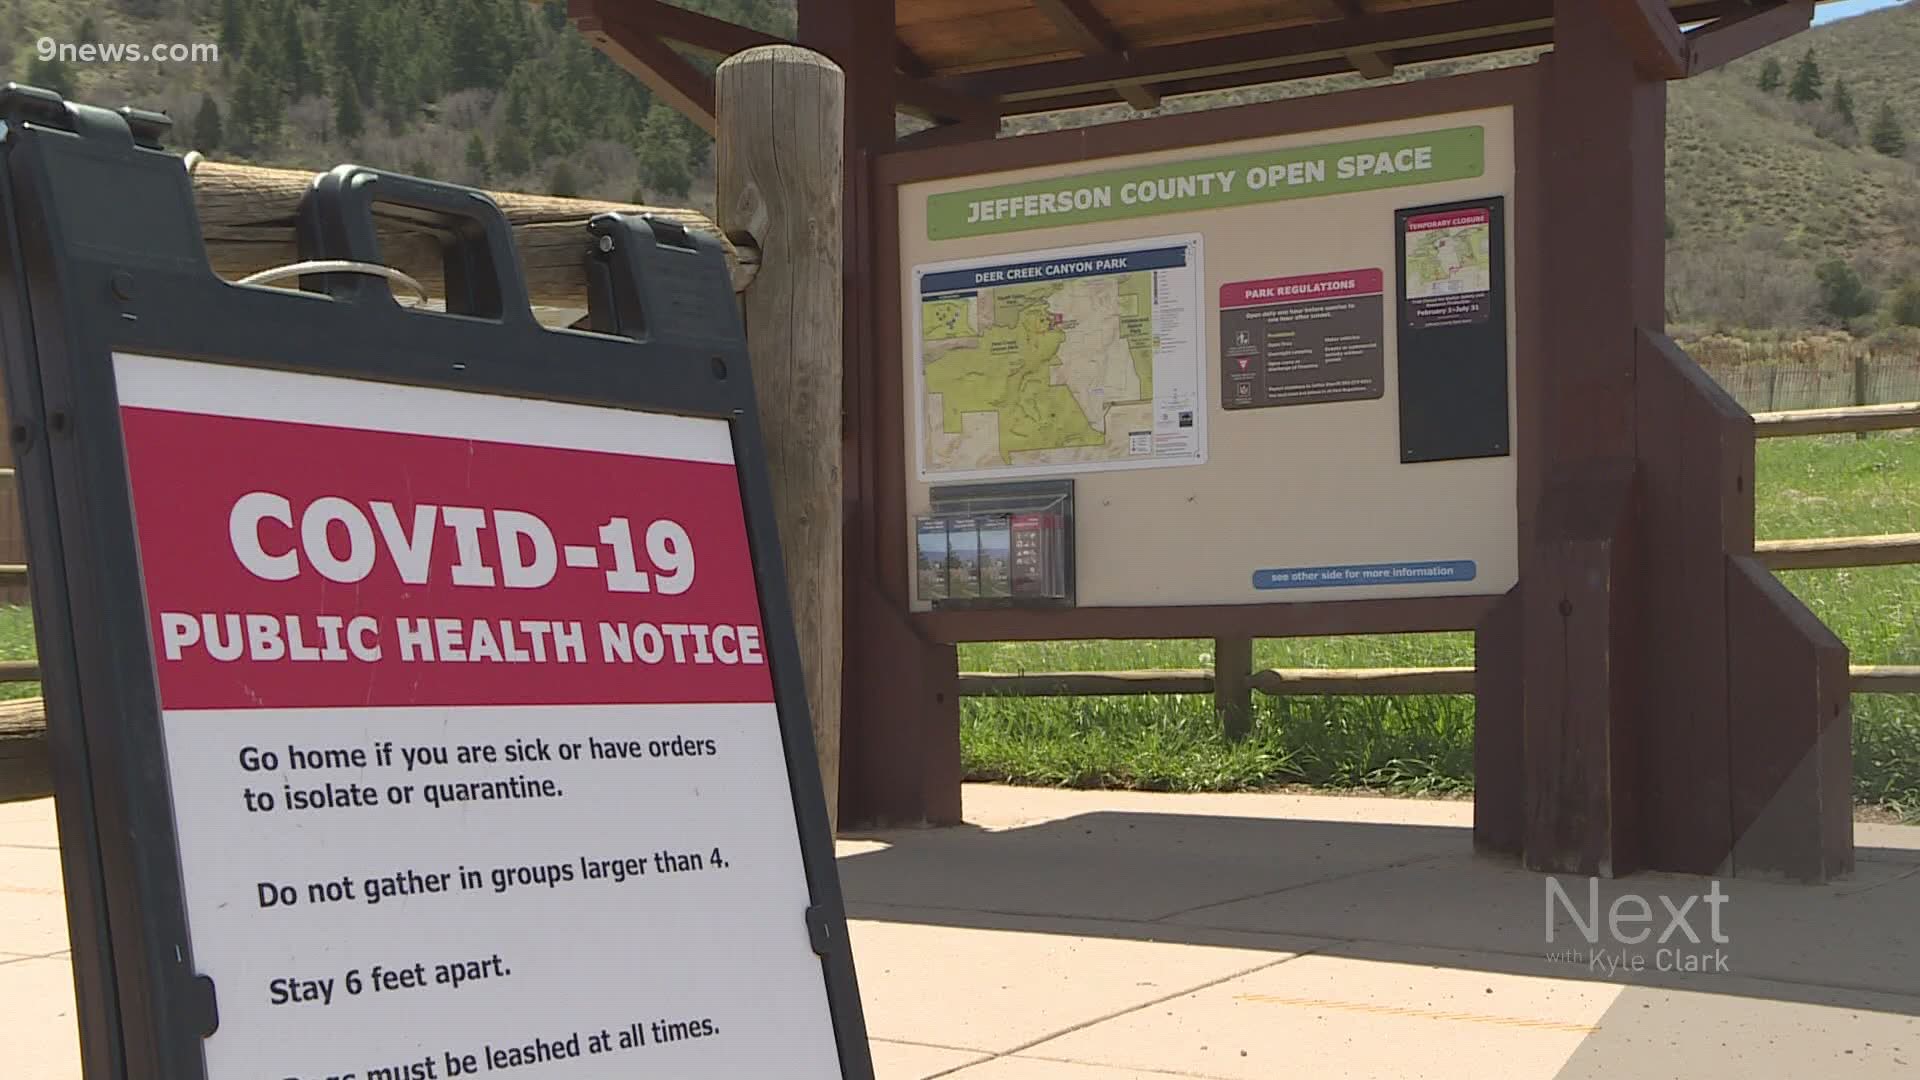 Rangers in Colorado have noticed an uptick of trail traffic during COVID-19, but in places like Jefferson County, there may not be money for trail maintenance.